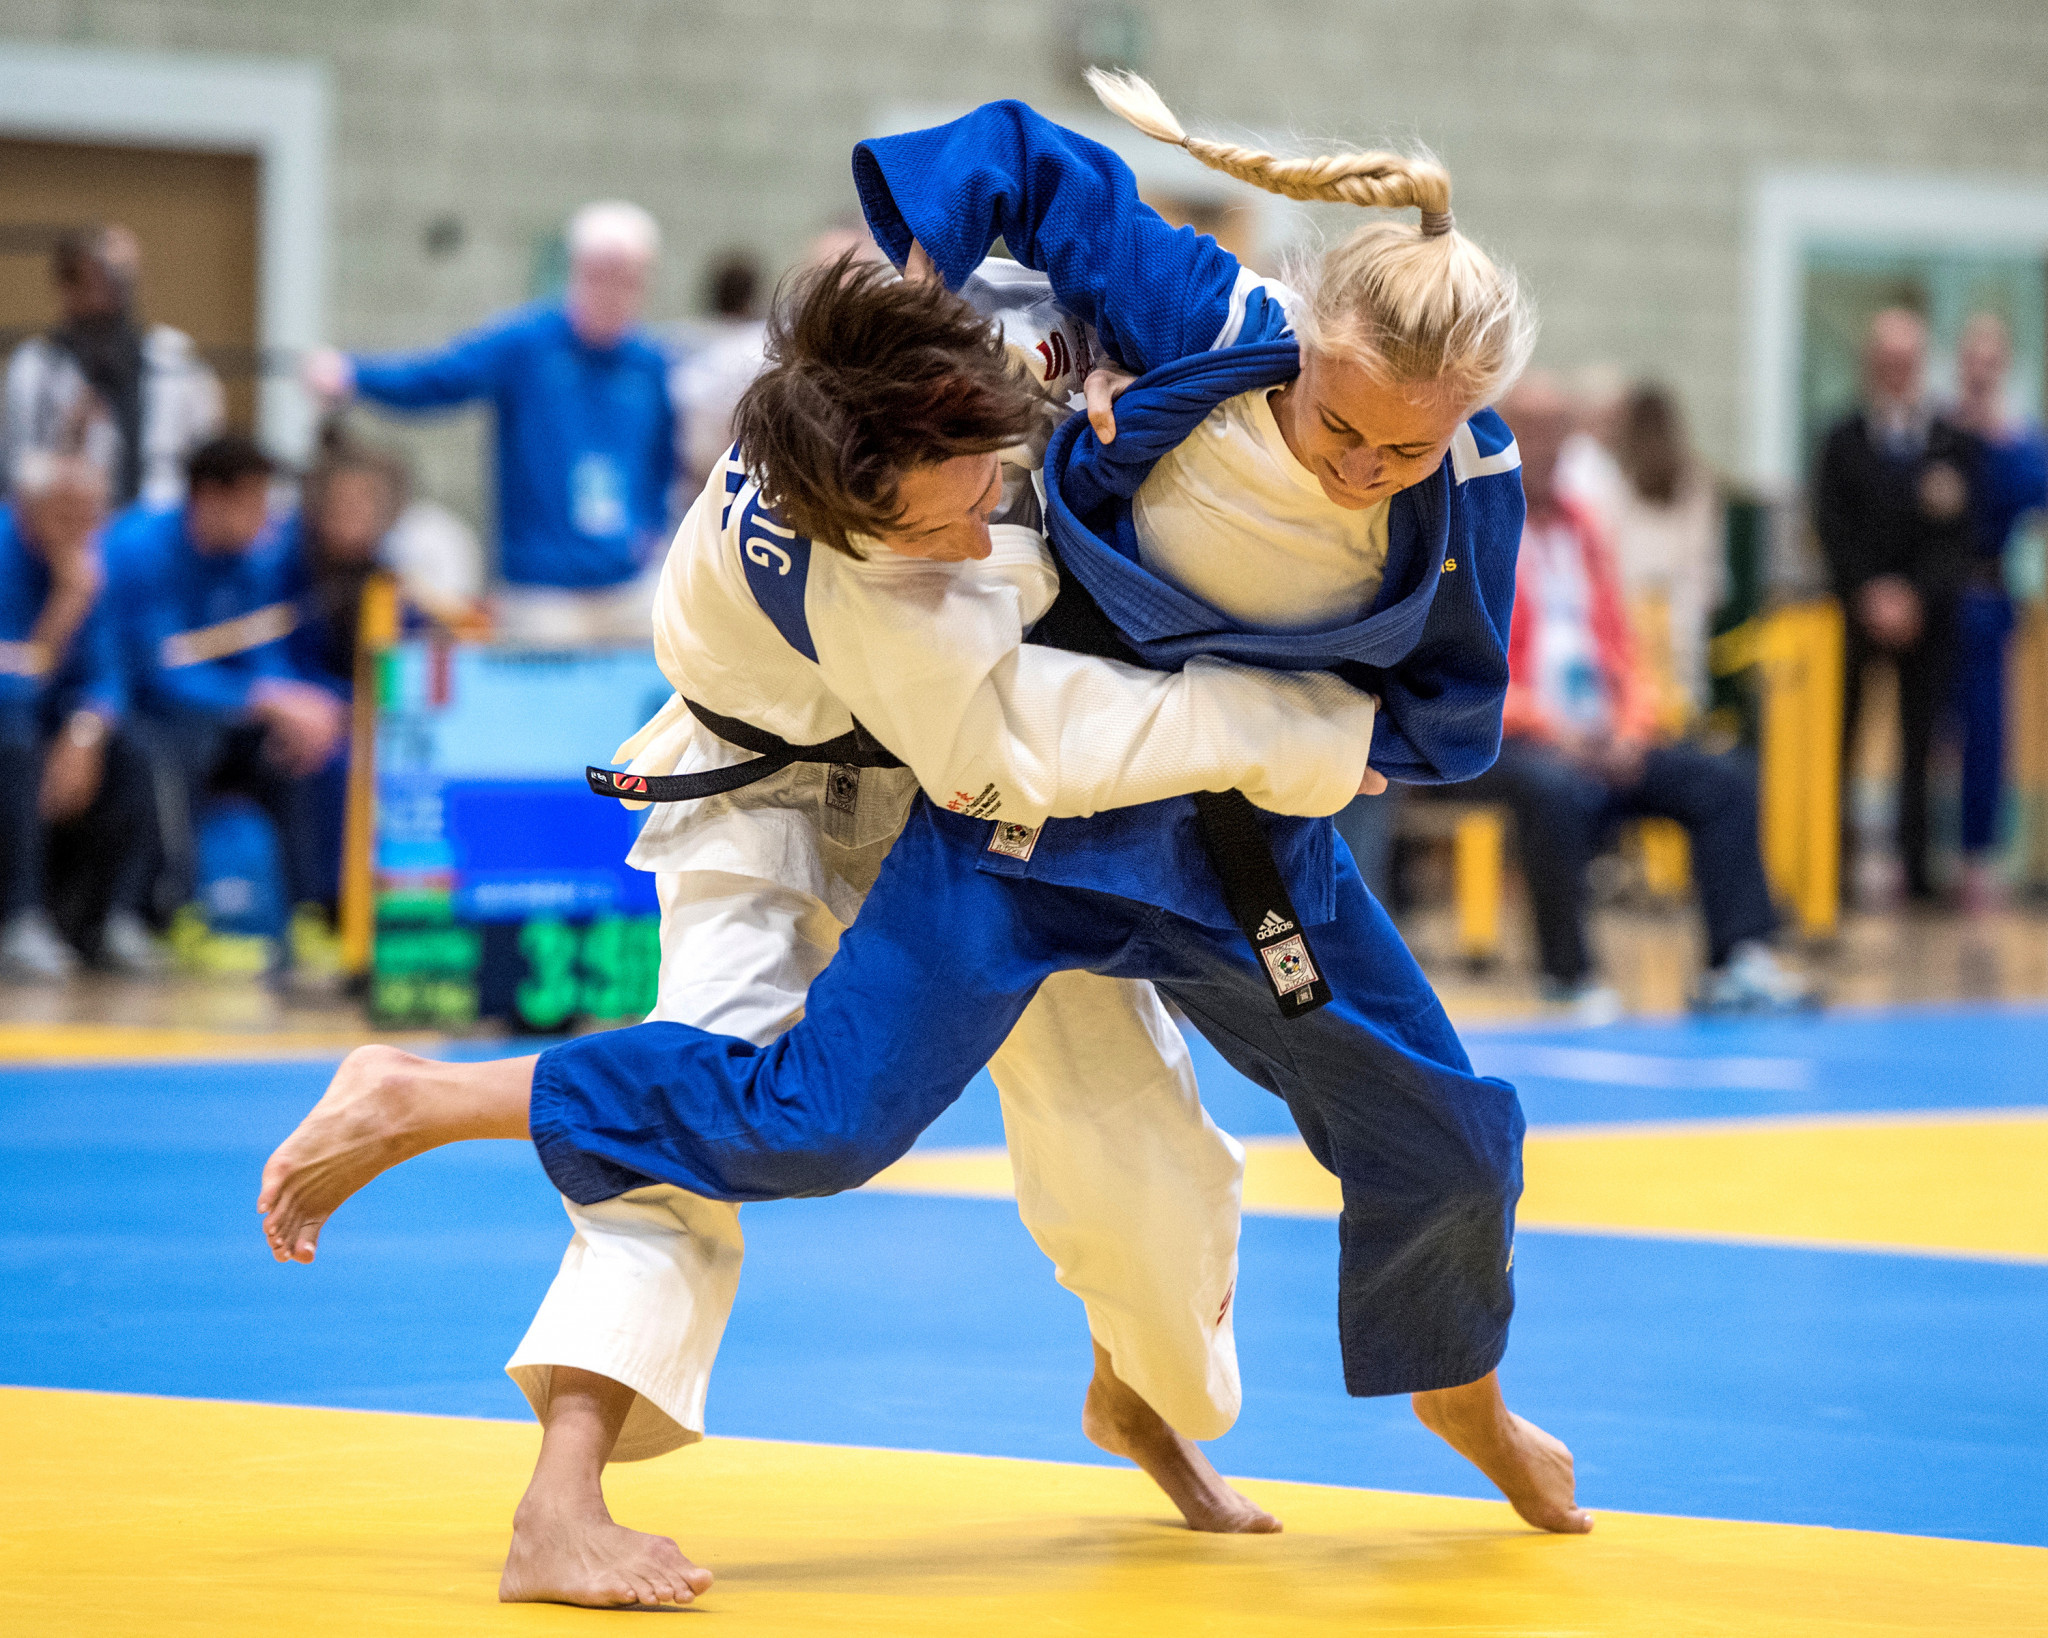 The objective of the IBSA Judo film is to demonstrate to elite coaches what it takes to coach visually impaired athletes to the highest level ©Getty Images 